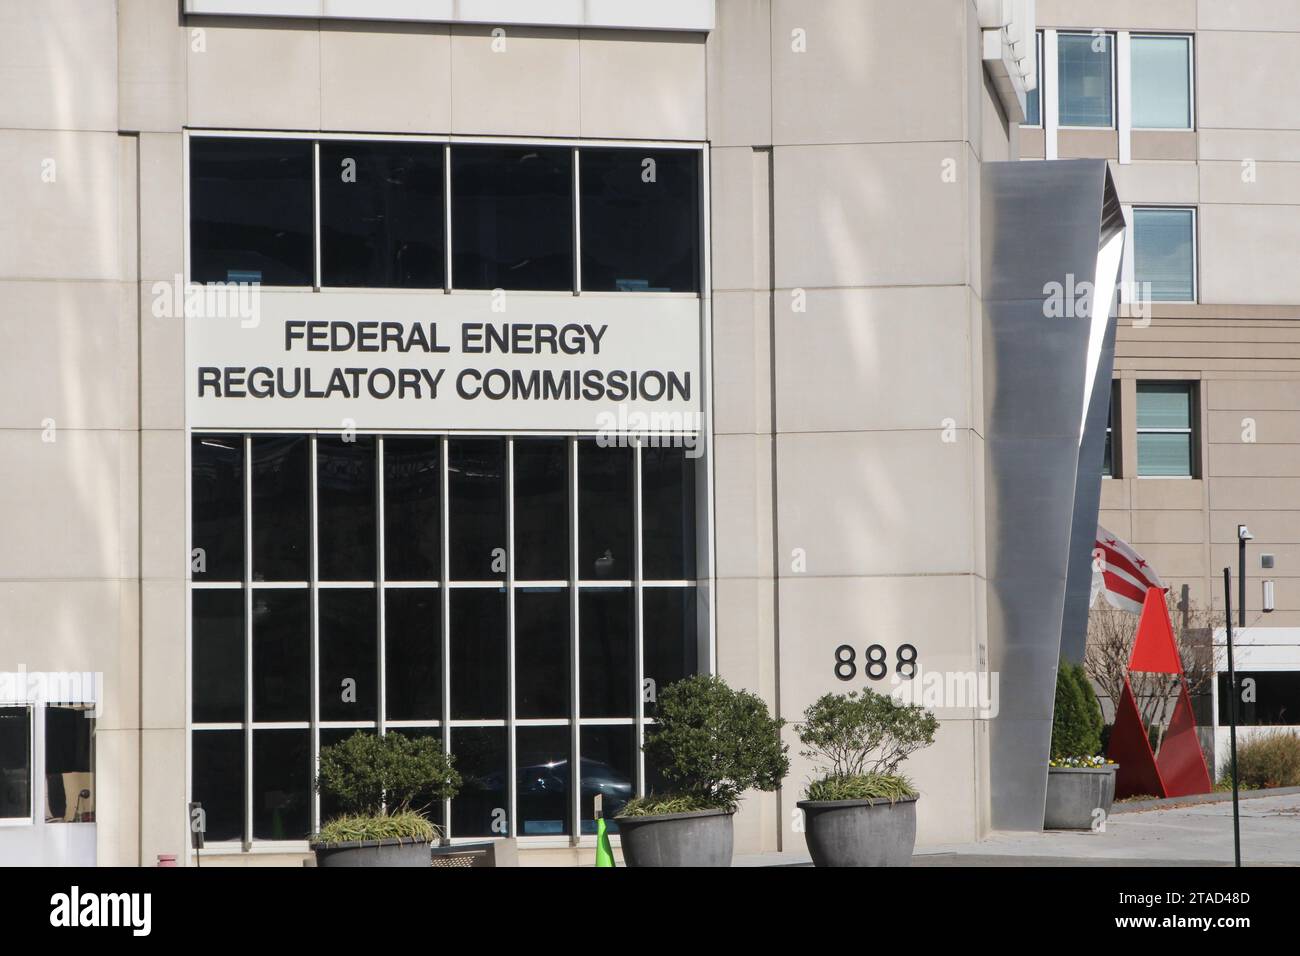 Exterior view and signage of the Federal Energy Regulatory Commission headquarters in NE Washington, D.C. on November 28, 2023. FERC is part of the U.S. Department of Energy and is composed of five commissioners who are nominated by the U.S. president and confirmed by the U.S. Senate. FERC regulates the transmission and wholesale sale of electricity and natural gas in interstate commerce, as well as regulates the transmission of oil by pipeline in interstate commerce. (Photo by Carlos Kosienski/Sipa USA) Stock Photo